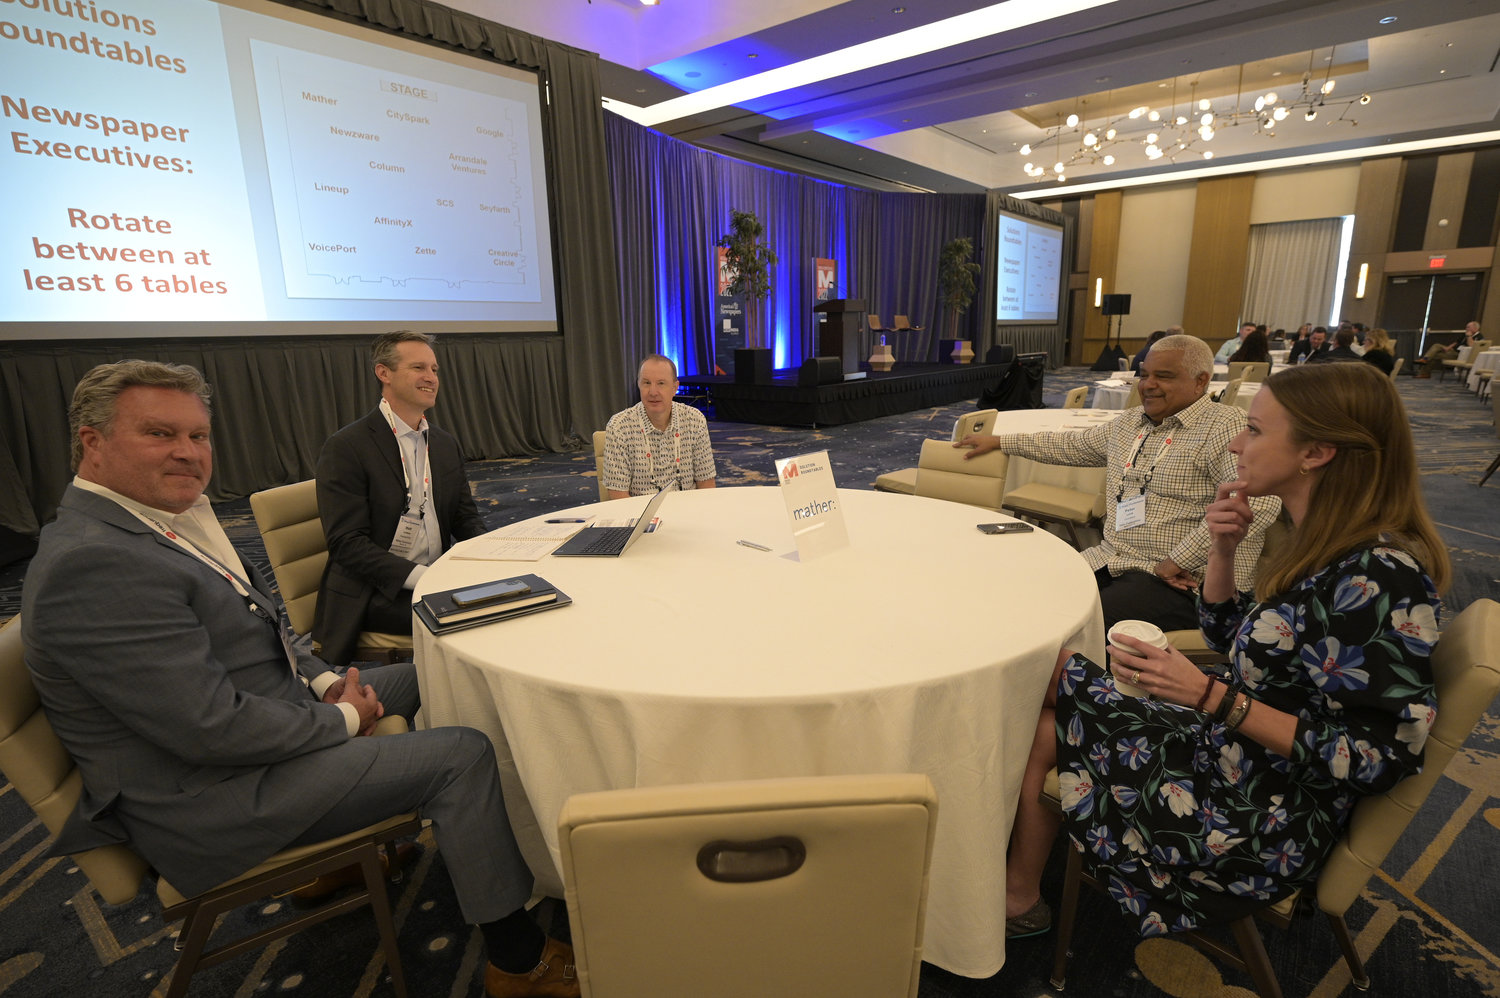 Mather Economics held a discussion at its Roundtable about growing revenues, increasing subscription levels and optimizing operations through applied analytics. (Photo by Phelan M. Ebenhack)